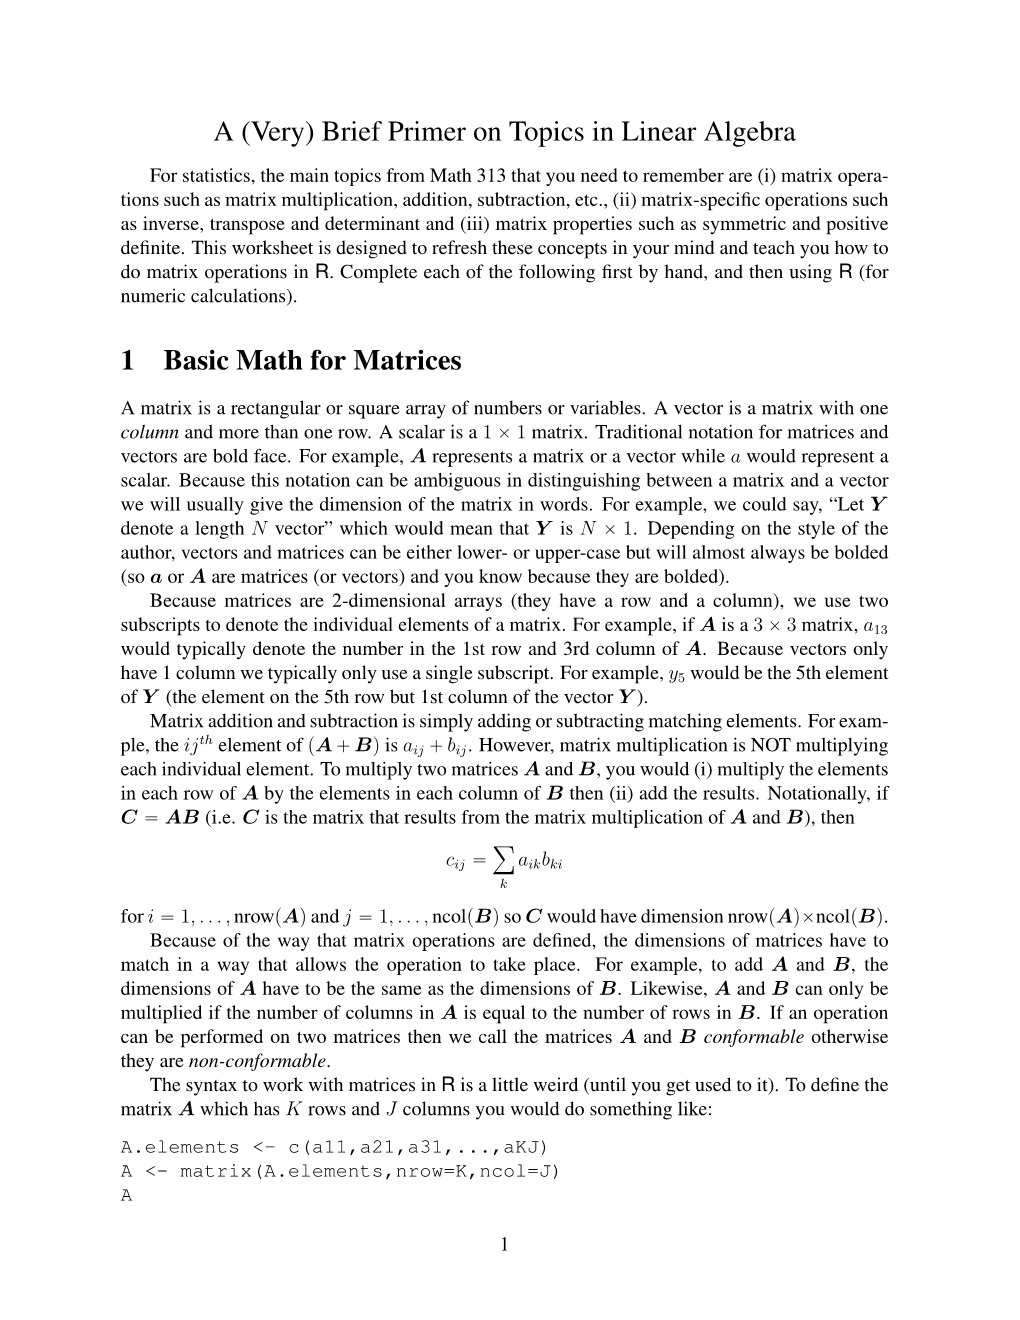 A (Very) Brief Primer on Topics in Linear Algebra 1 Basic Math For